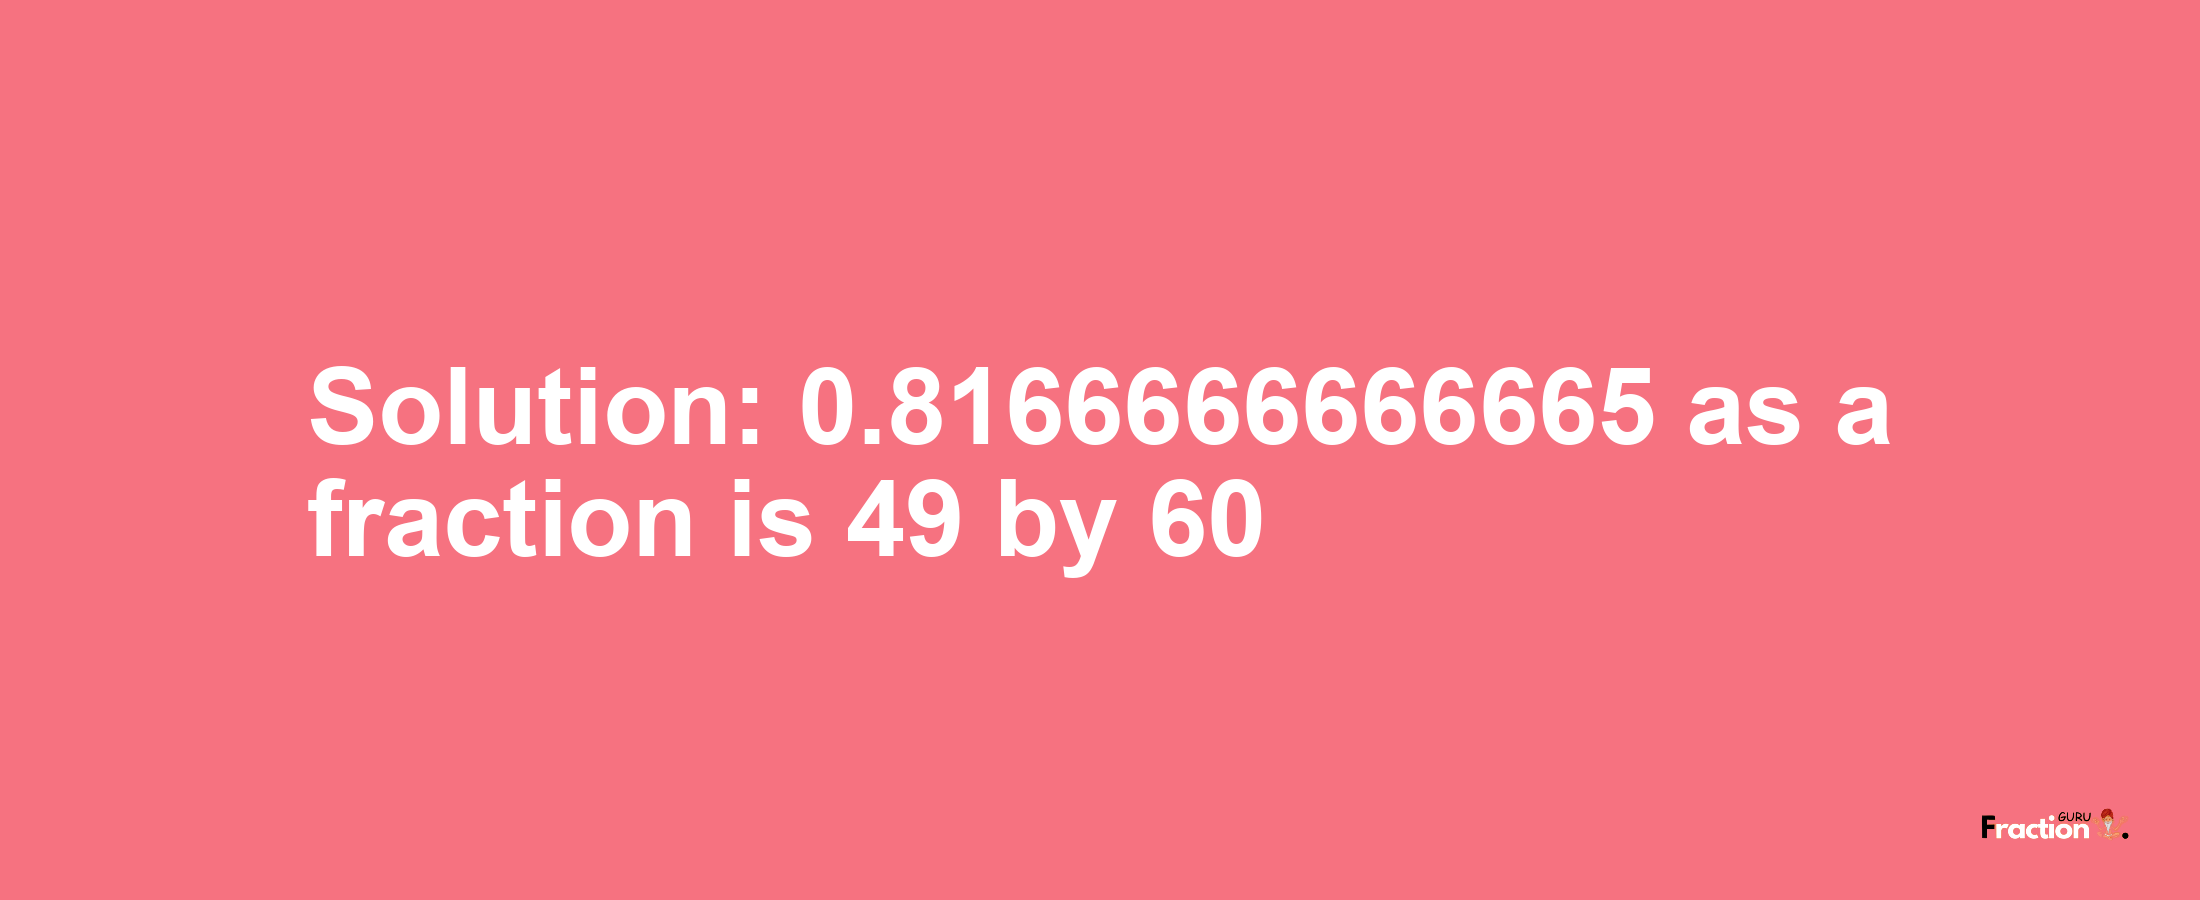 Solution:0.8166666666665 as a fraction is 49/60